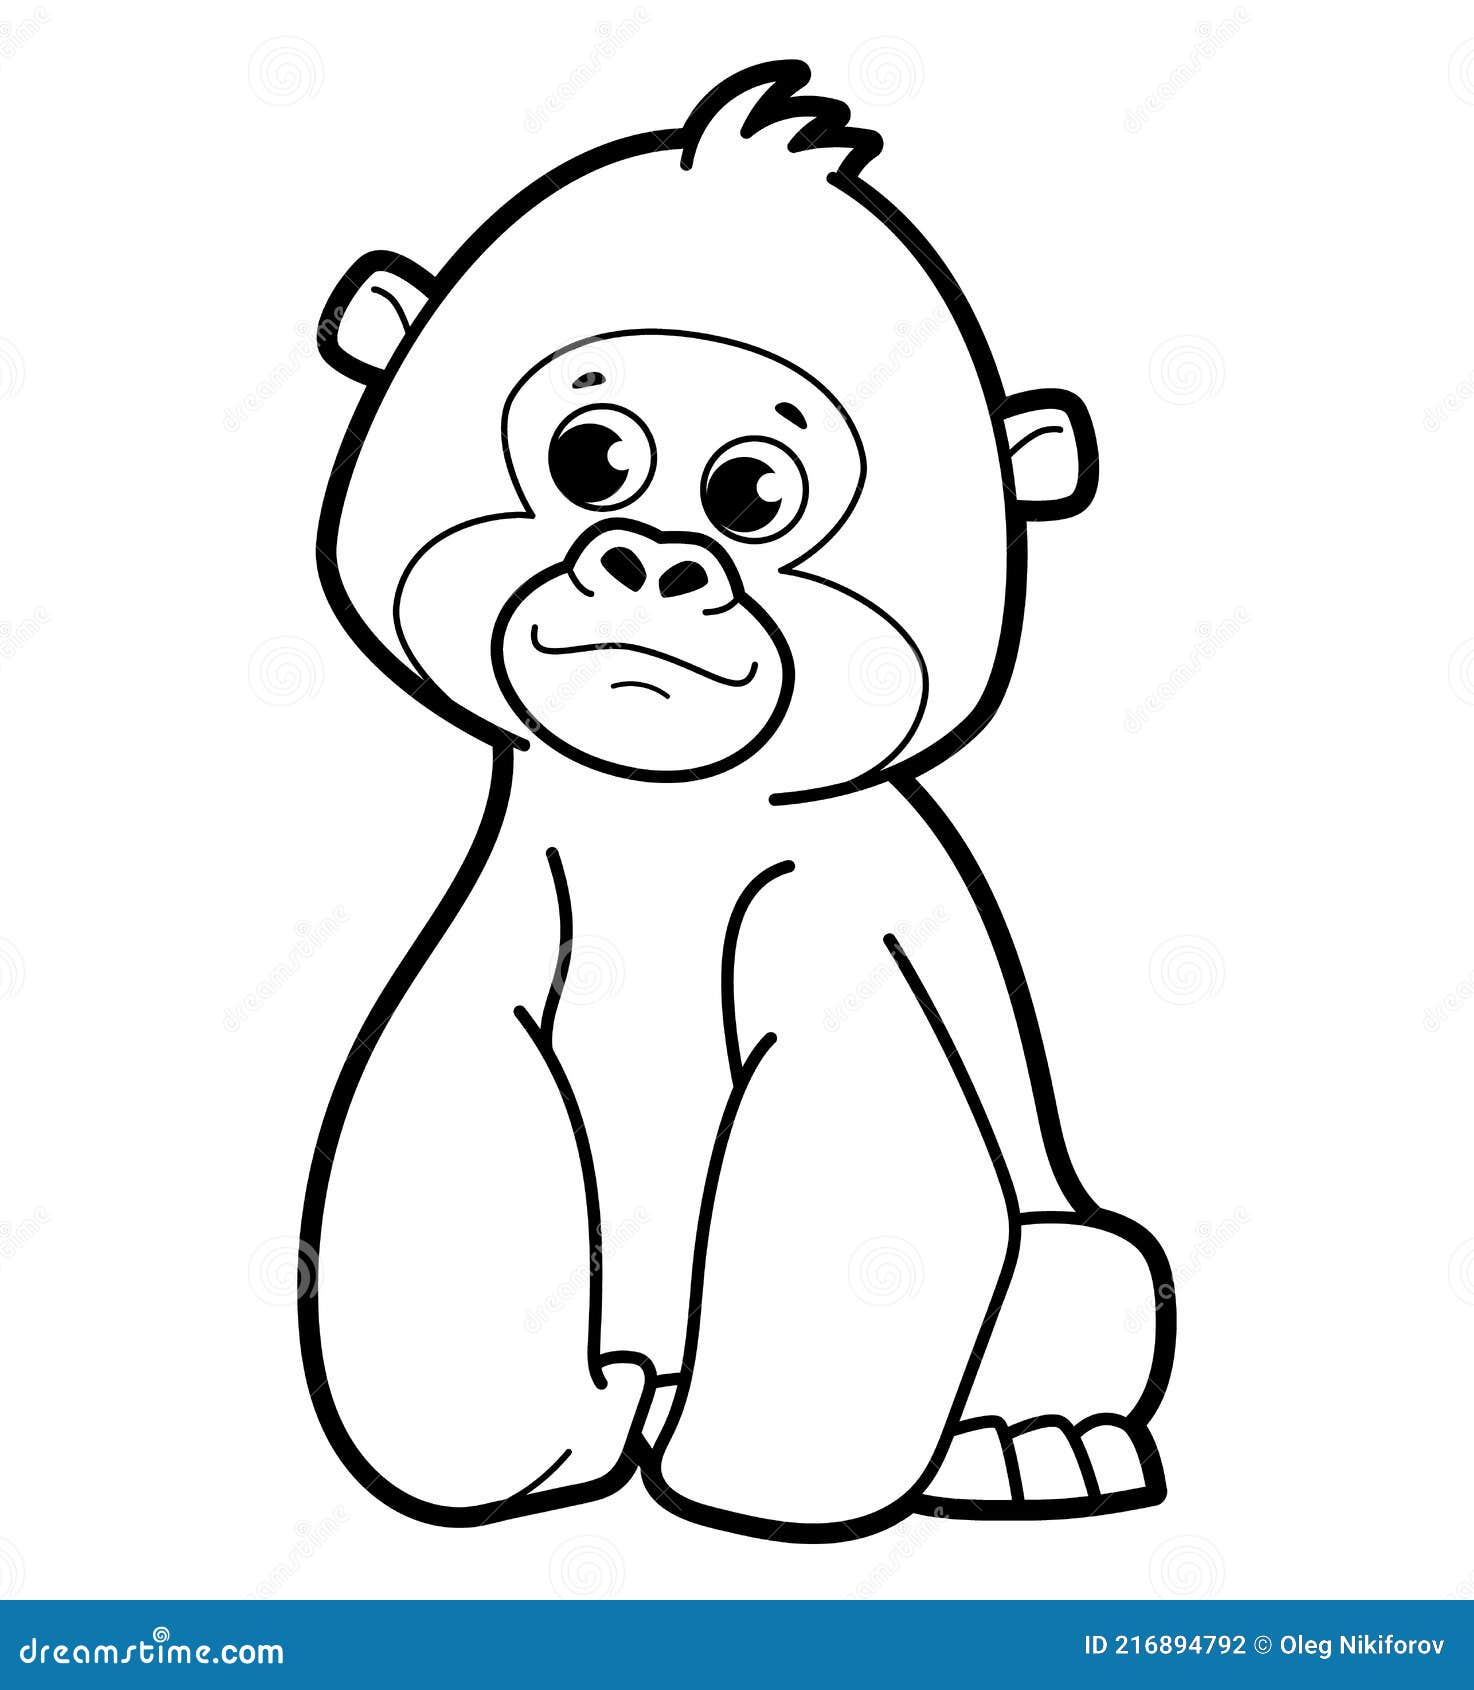 Gorilla Coloring Pages Stock Illustrations – 20 Gorilla Coloring ...